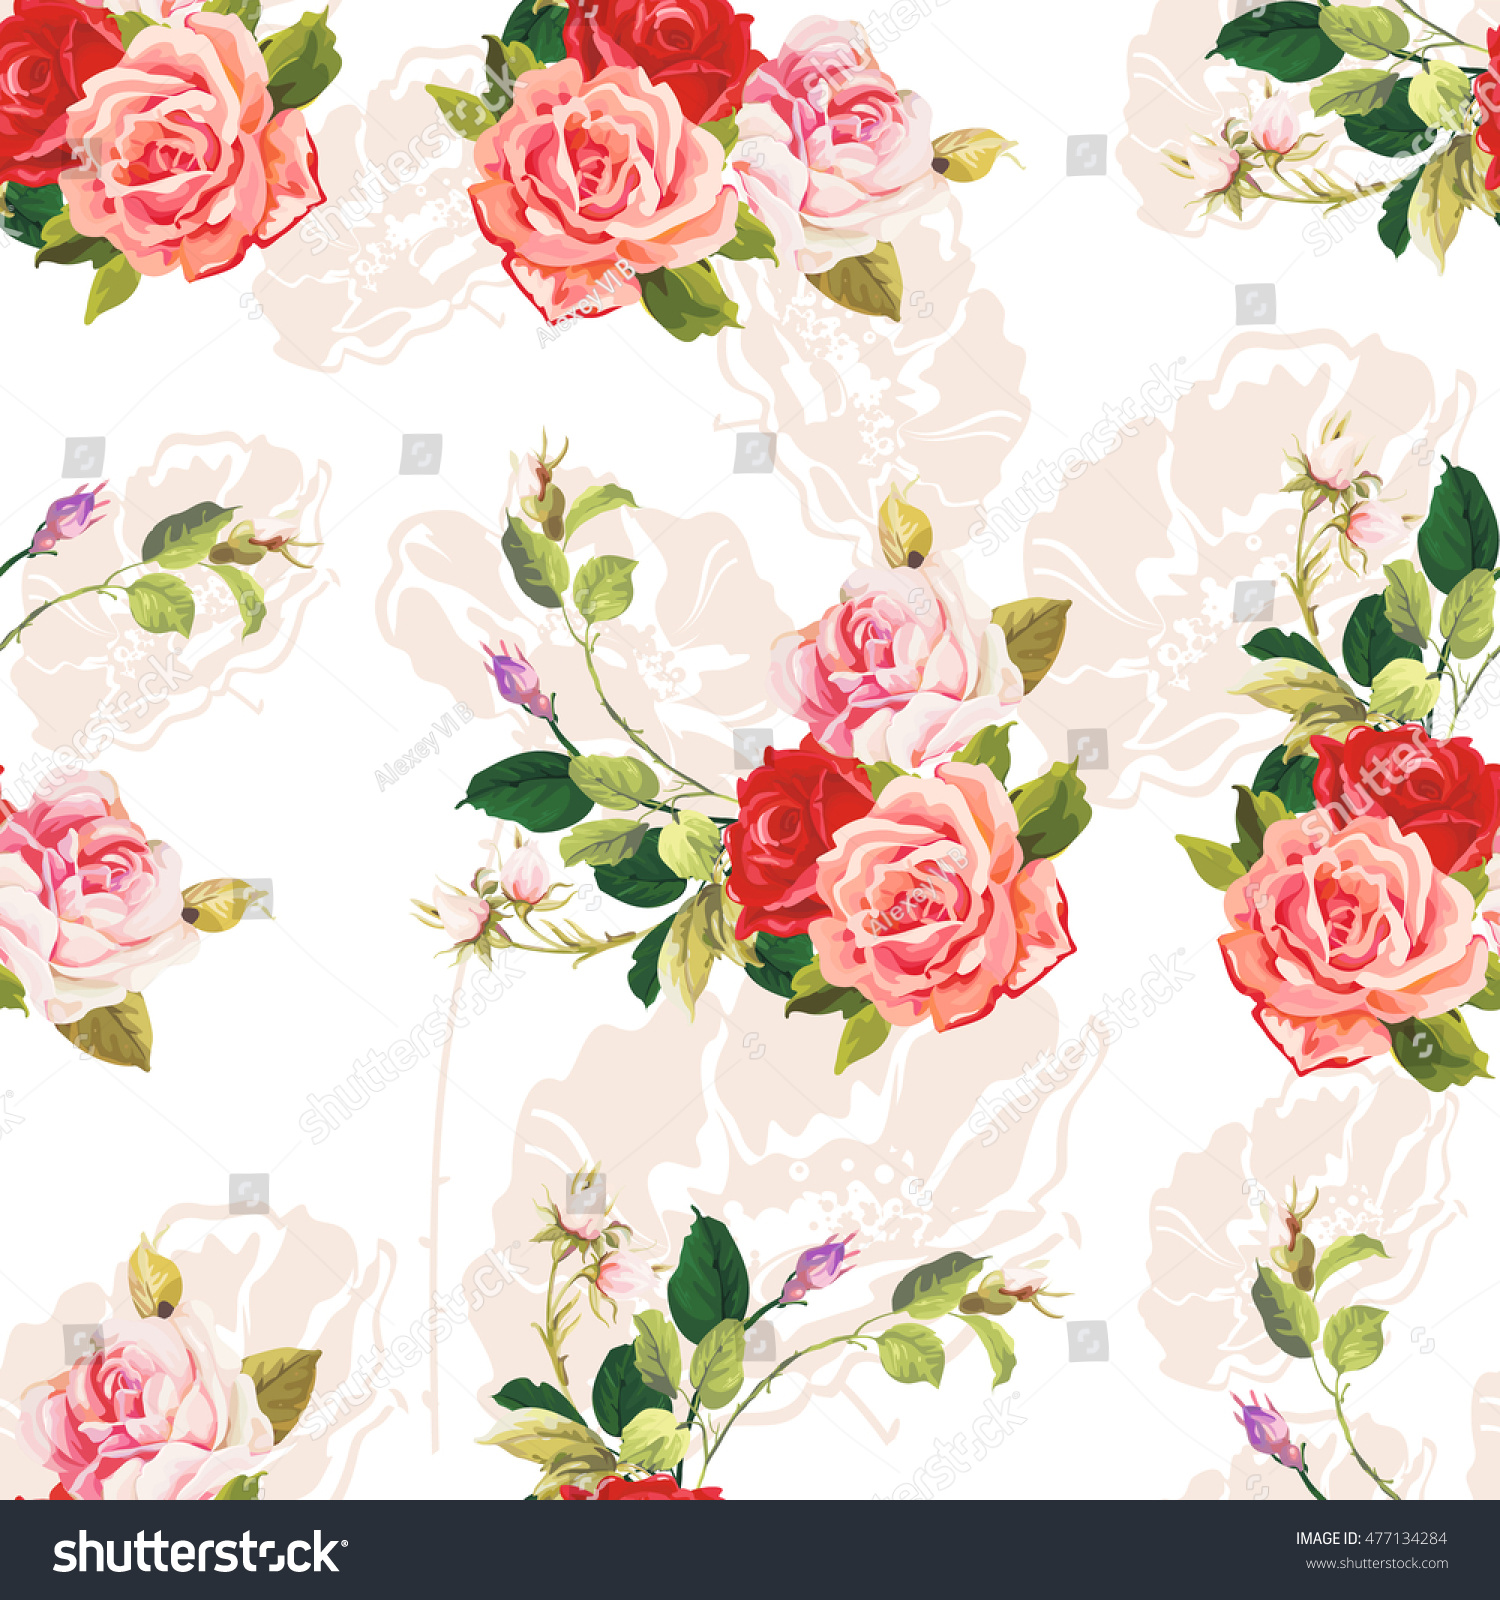 Seamless Floral Pattern Three Rose Vector Stock Vector 477134284